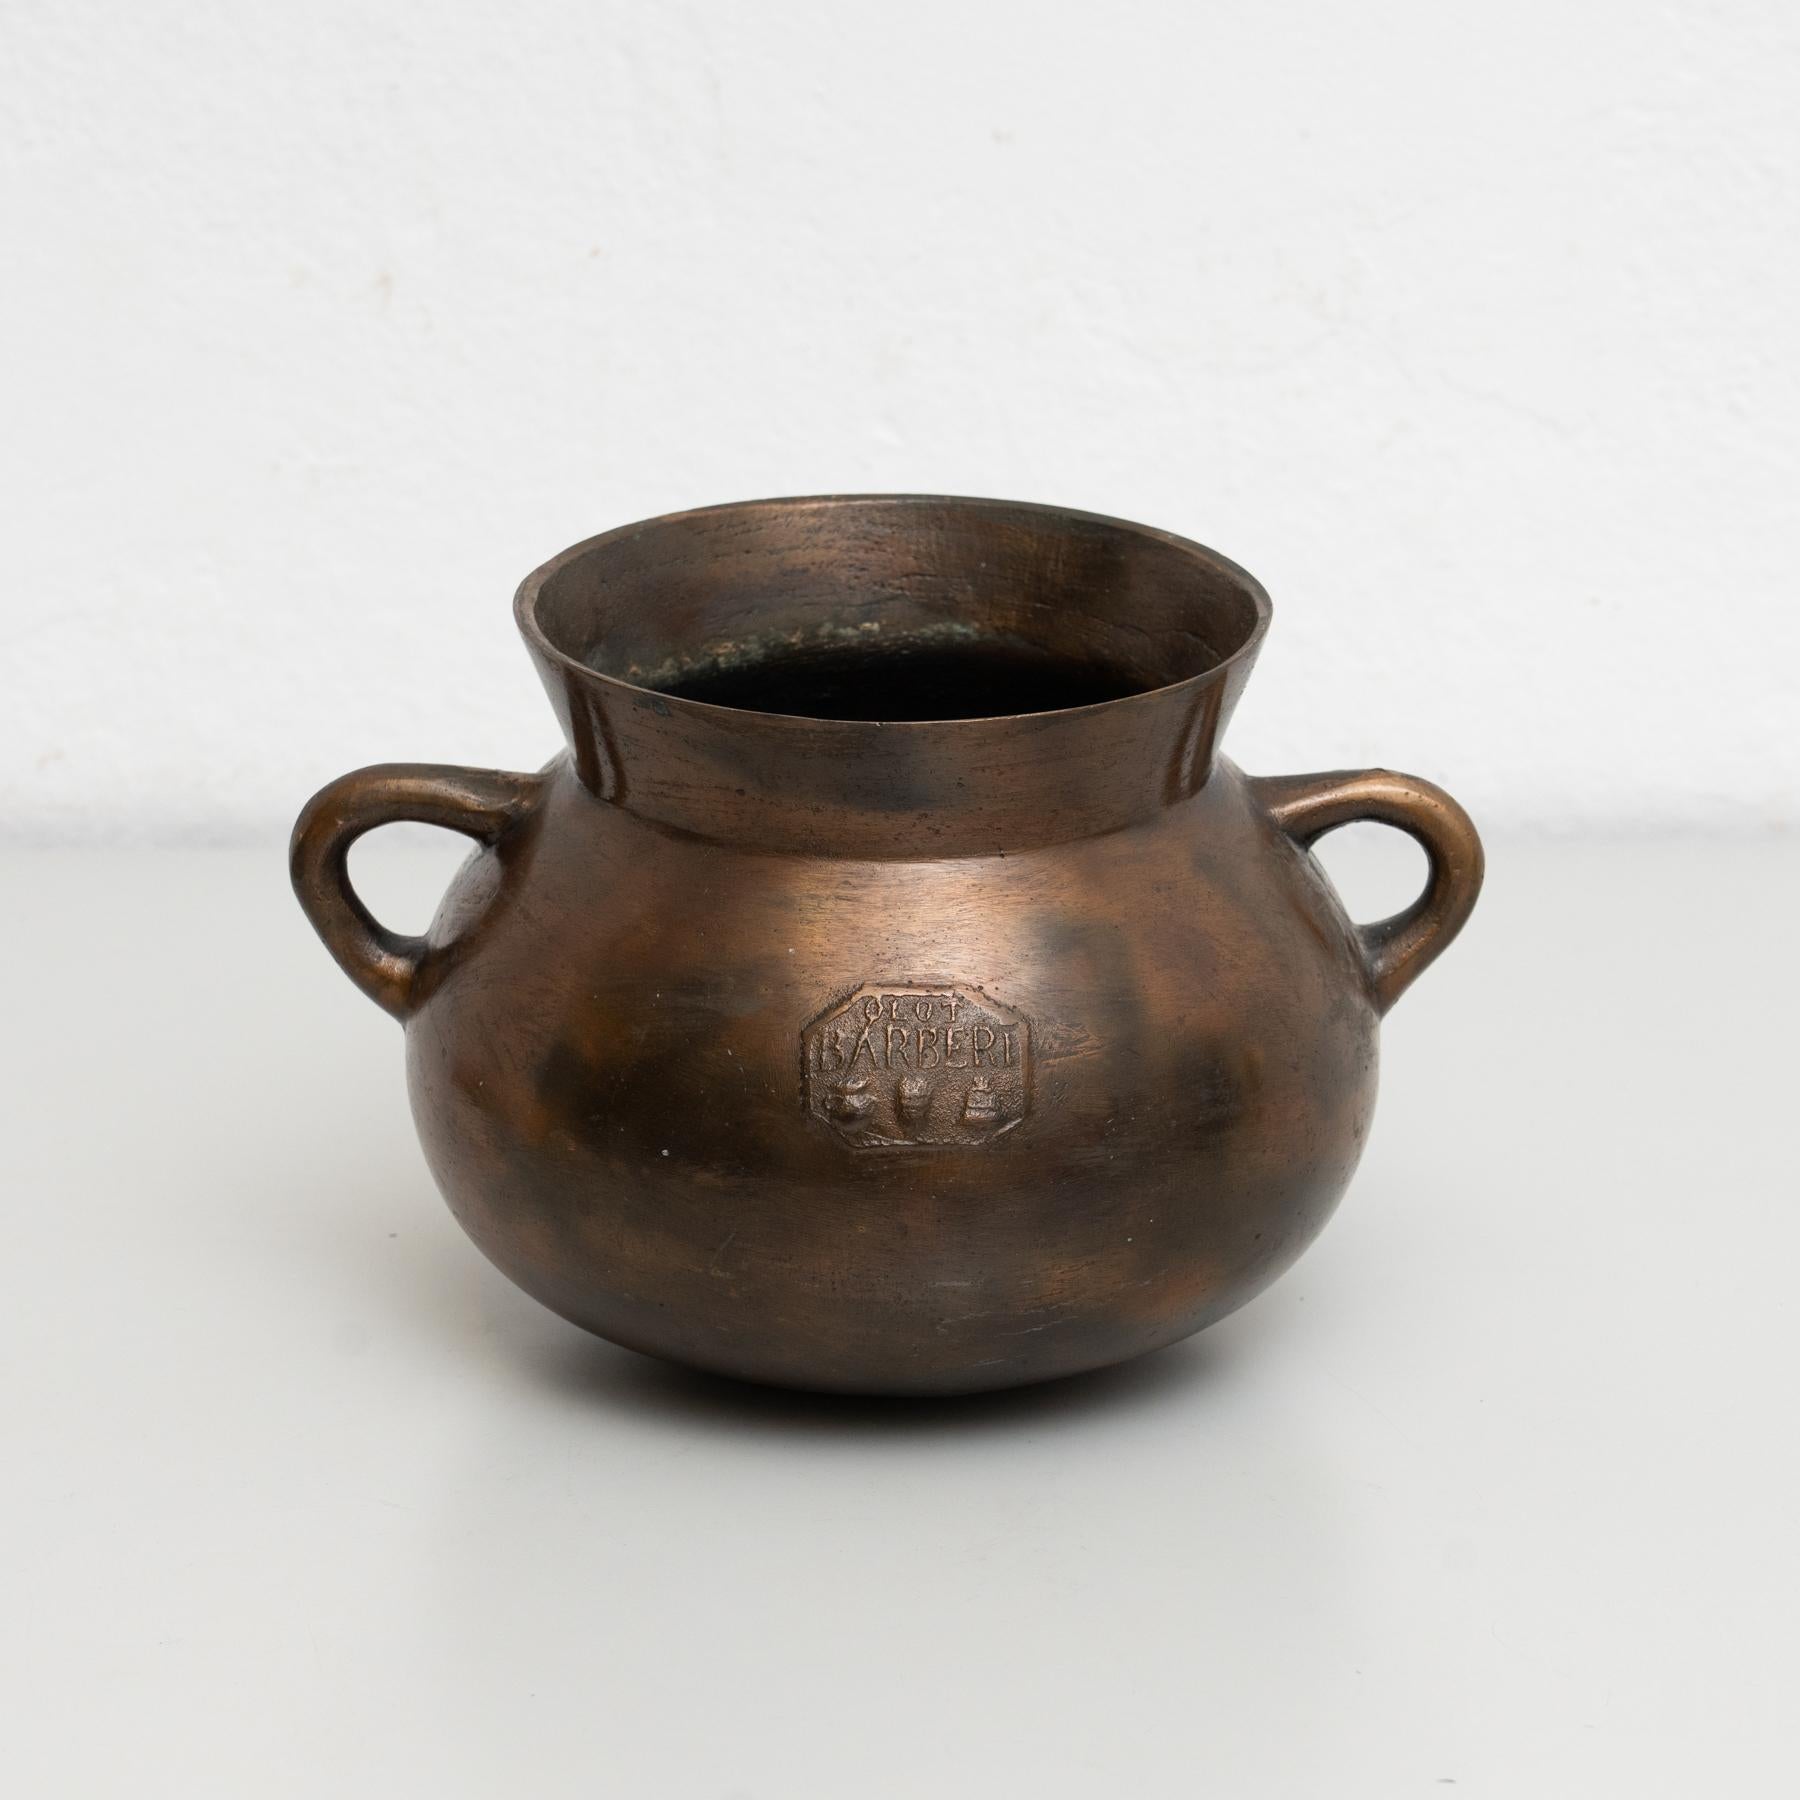 Vintage bronze pot.
By Barberi, Olot, Spain circa 1950.

In original condition, with minor wear consistent with age and use, preserving a beautiful patina.

Materials:
Bronze.
 